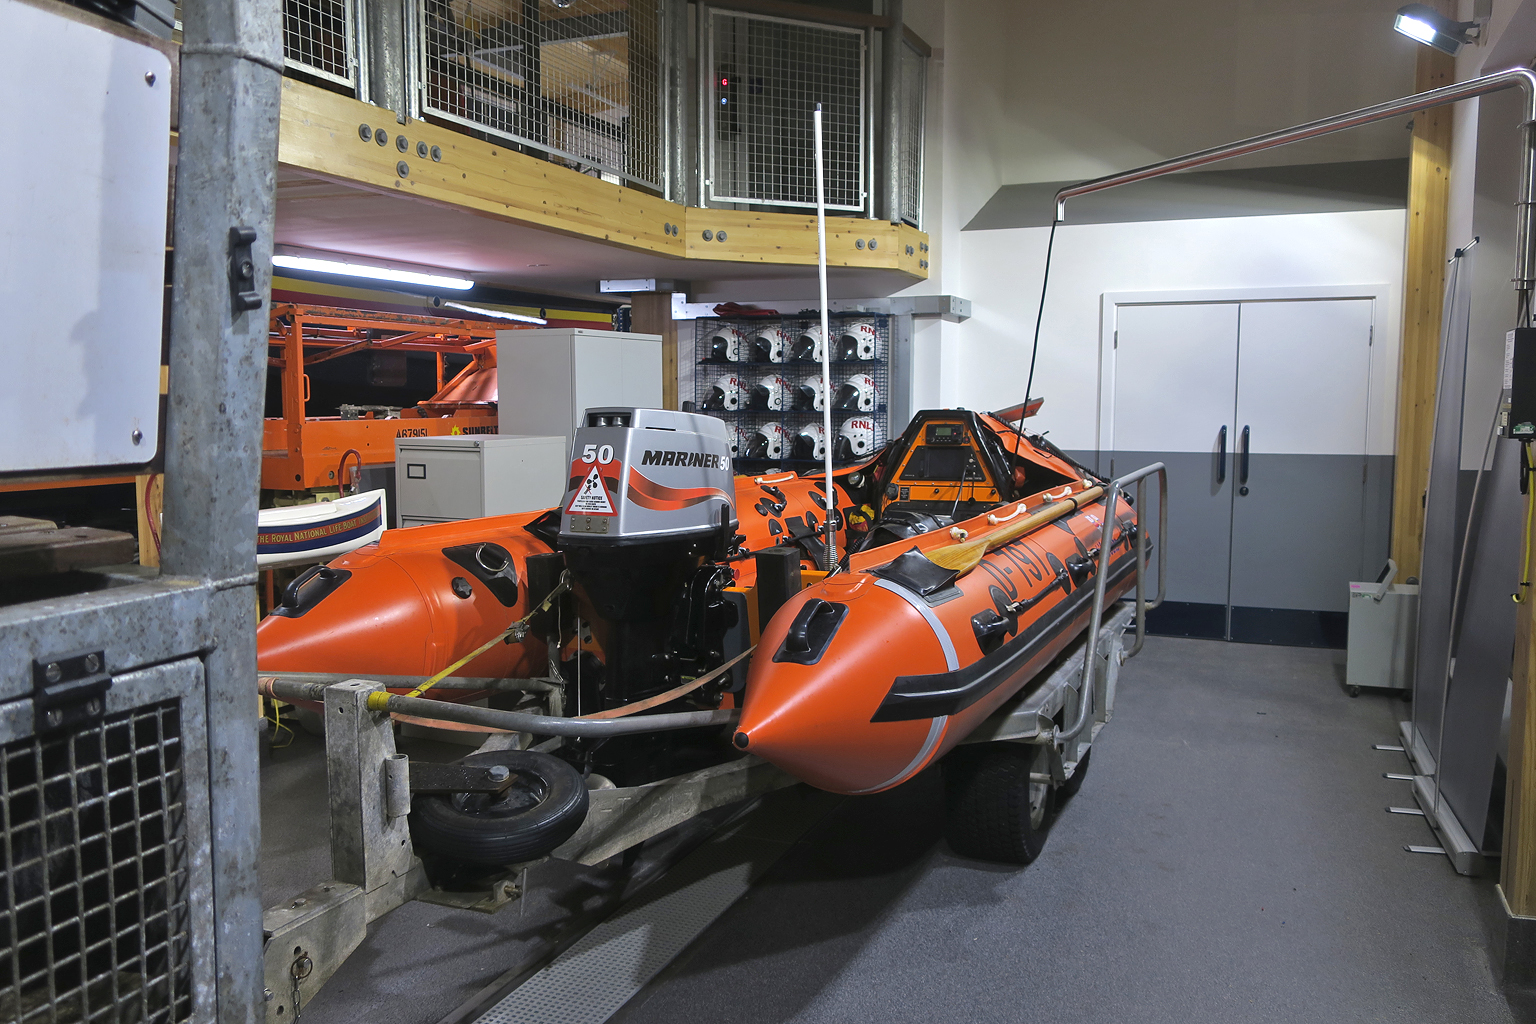 The inshore lifeboat D-797 'Peter Wilcox' in her new home coupled to the Softrak launching vehicle